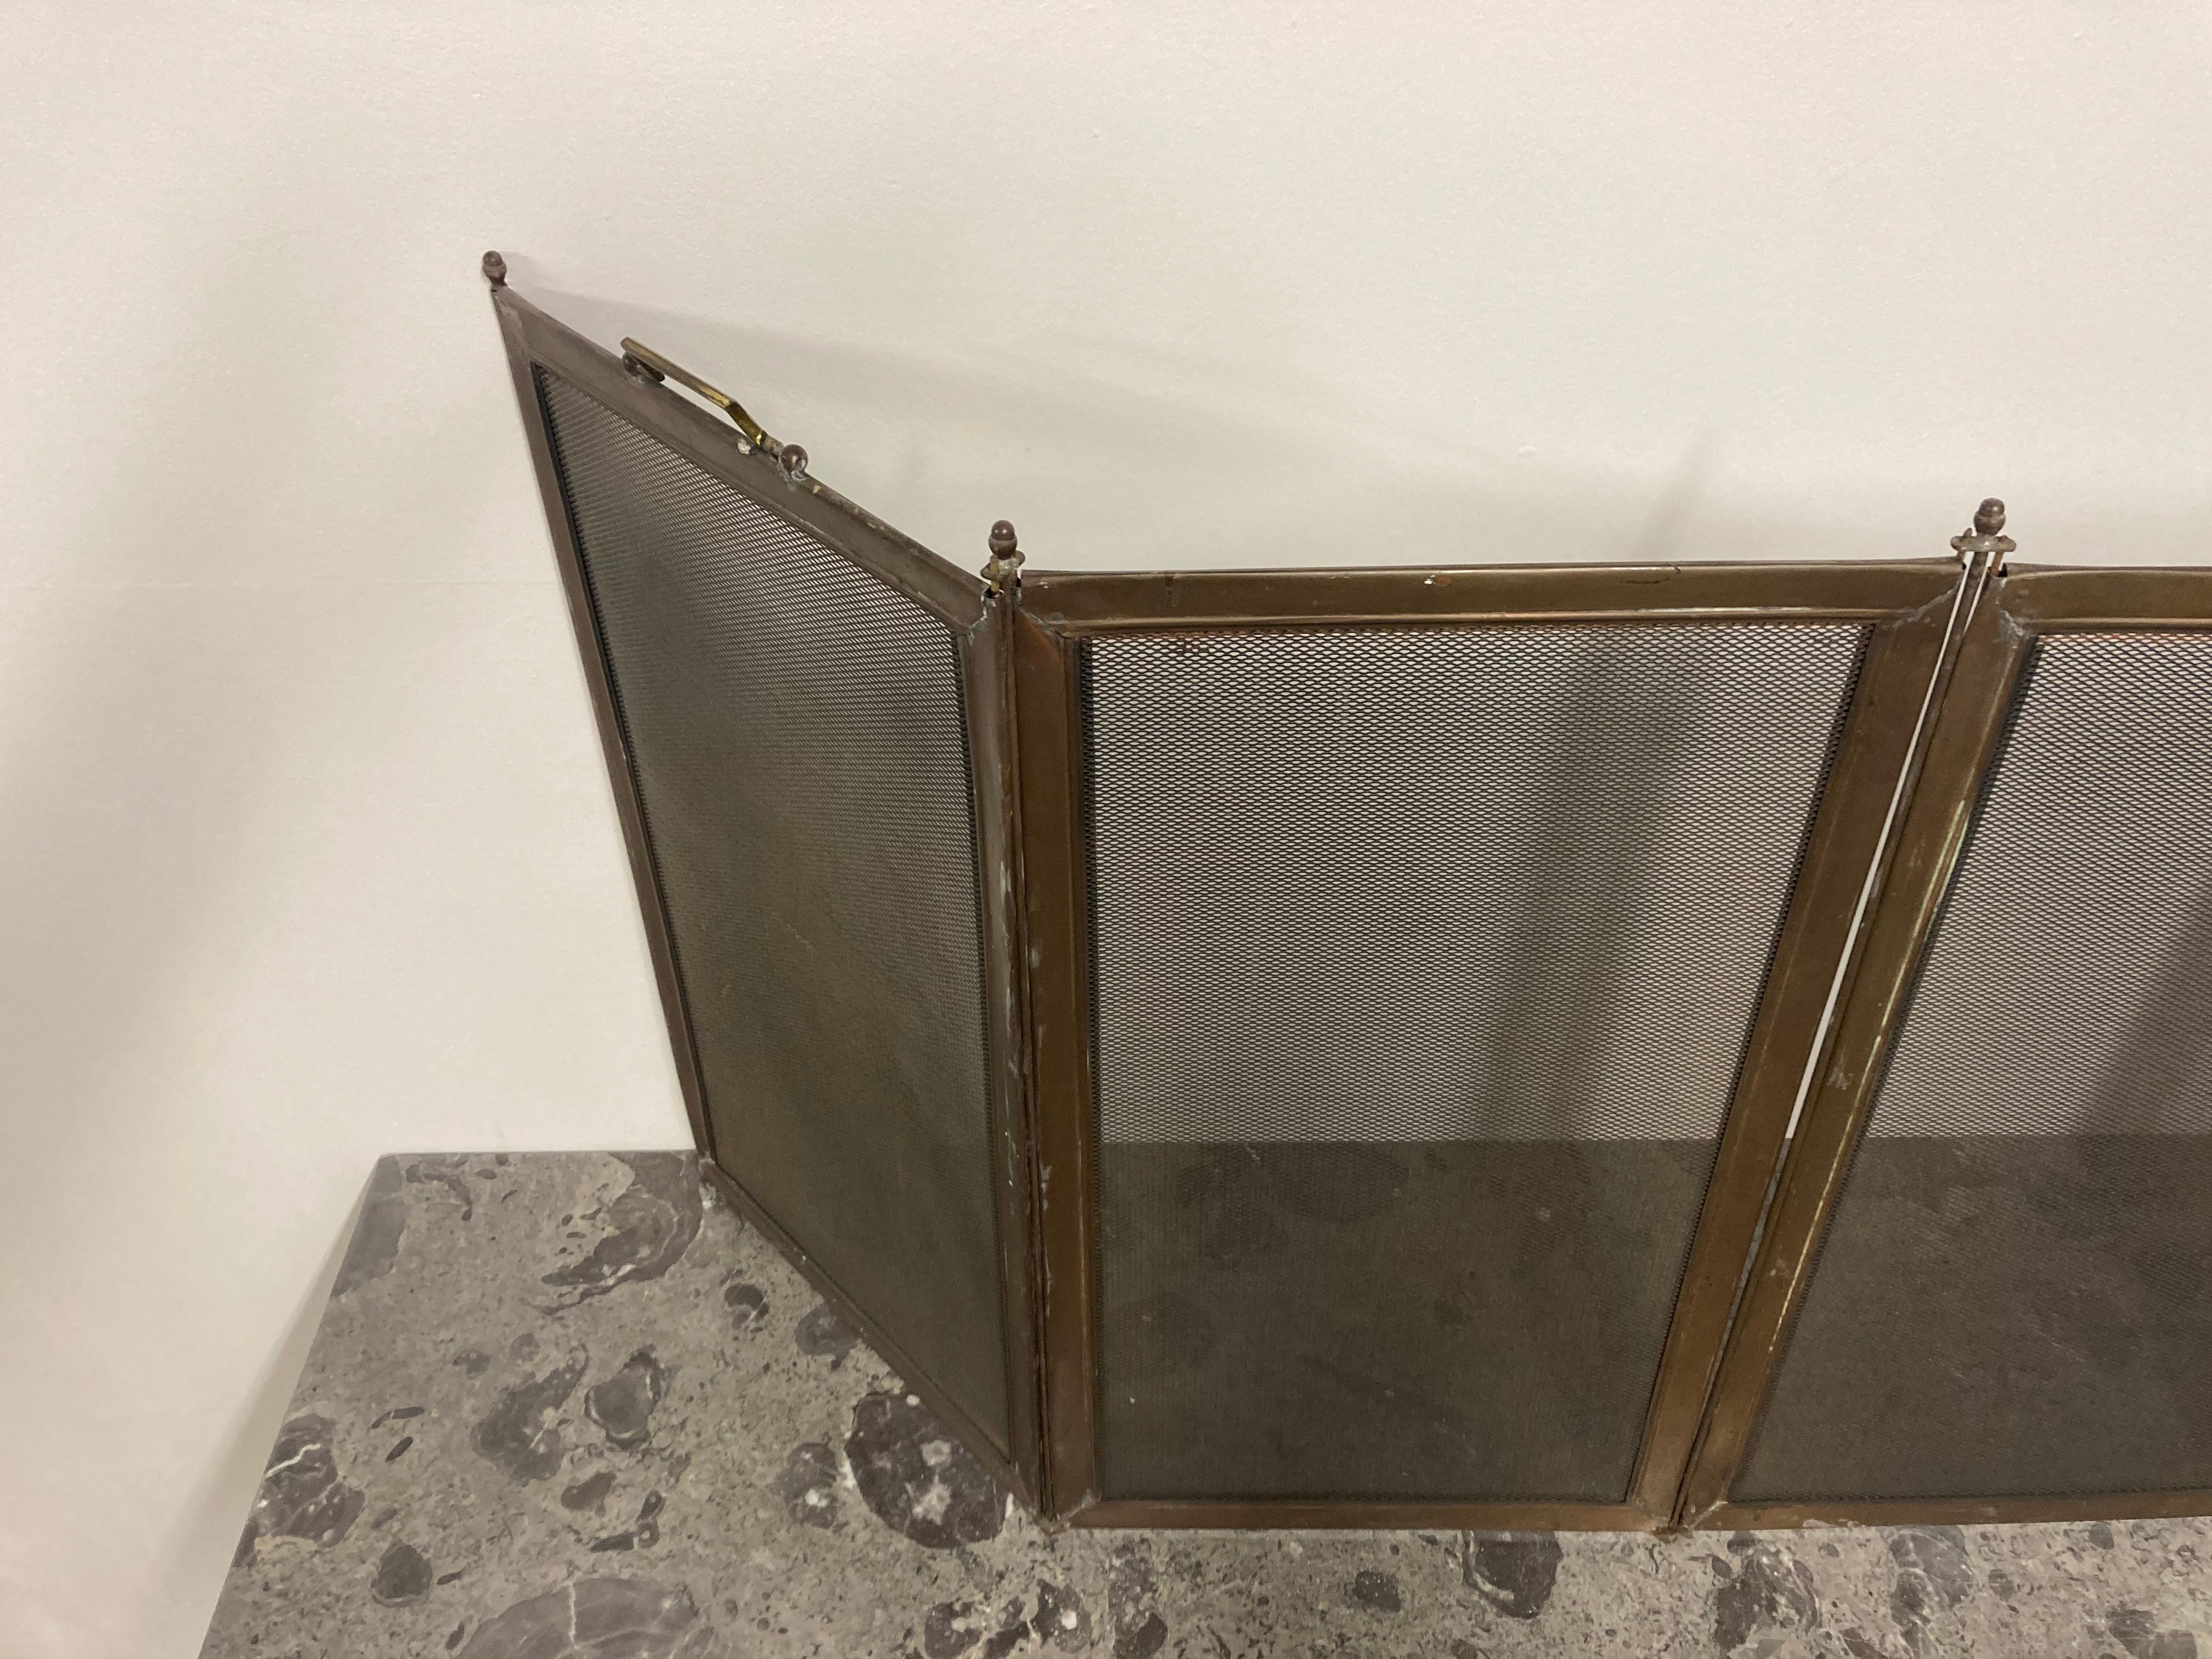 Nice decorative fireplace screen with a hammered look.
This-4 piece screen is easy to stow and use, it works best with an opening between 29 and 37 inch.

Overall very decorative piece in decent condition, like all antique 4 piece screen it can be a